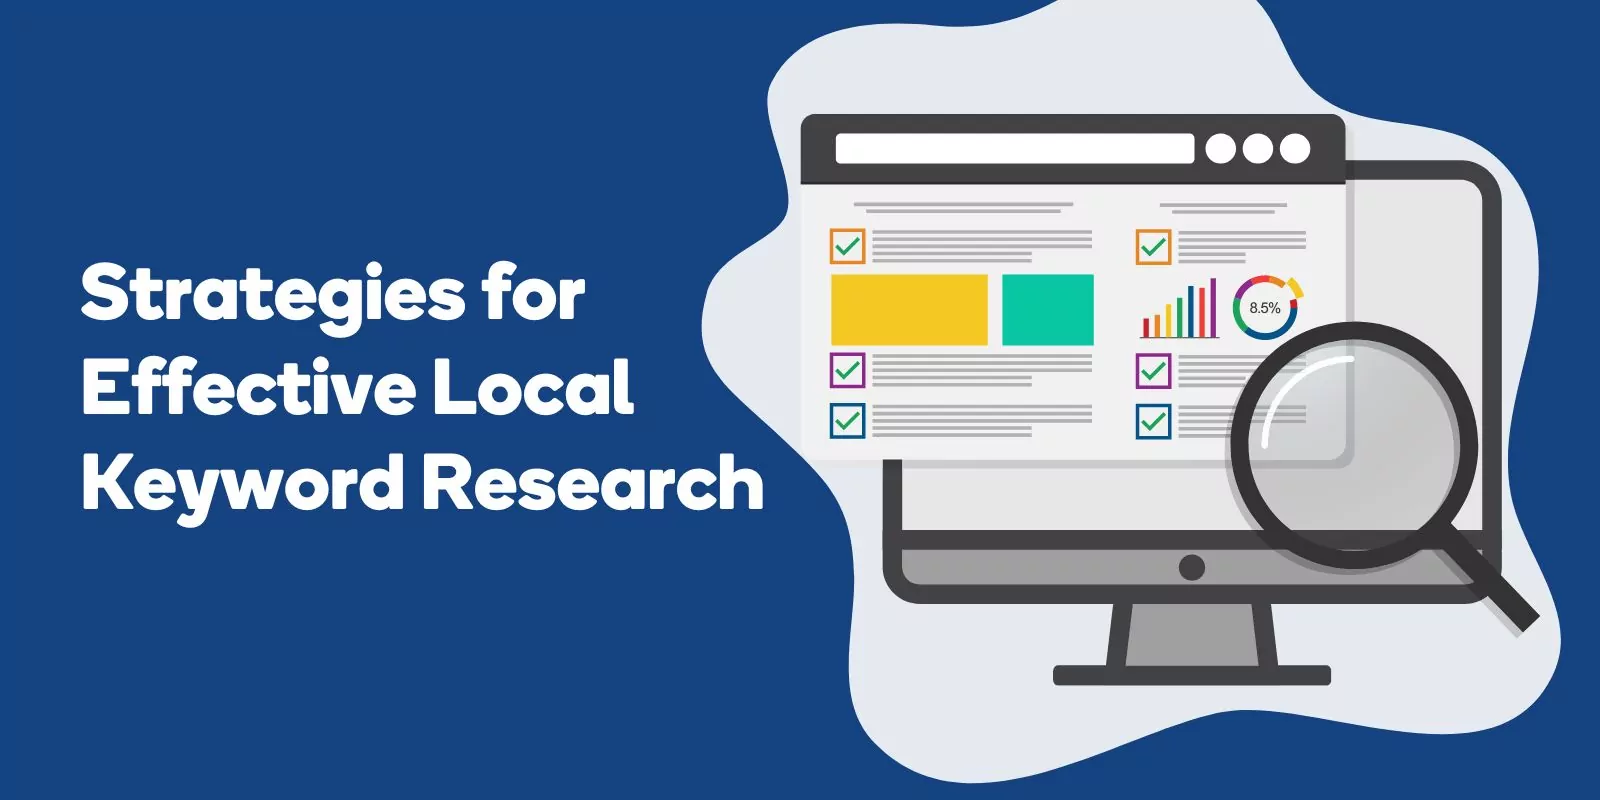 Strategies for Effective Local Keyword Research